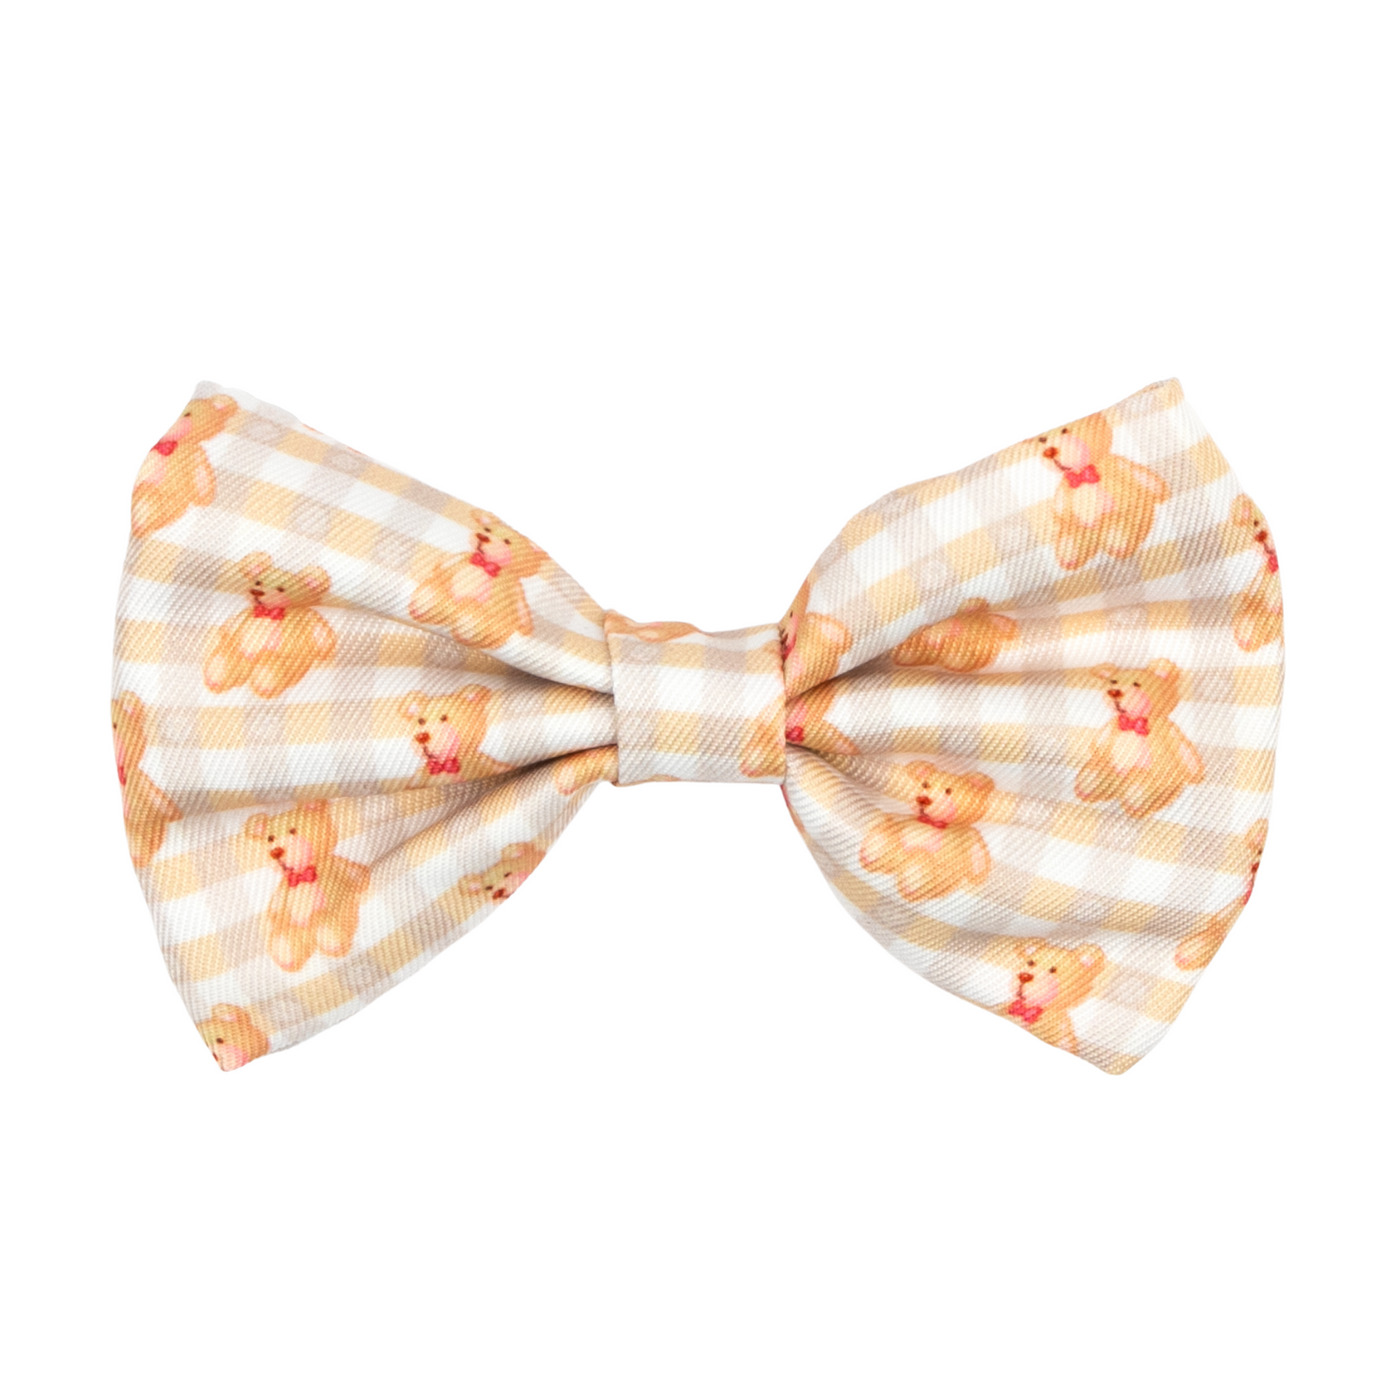 Teddy Bears Picnic - Bow Tie - End Of Line